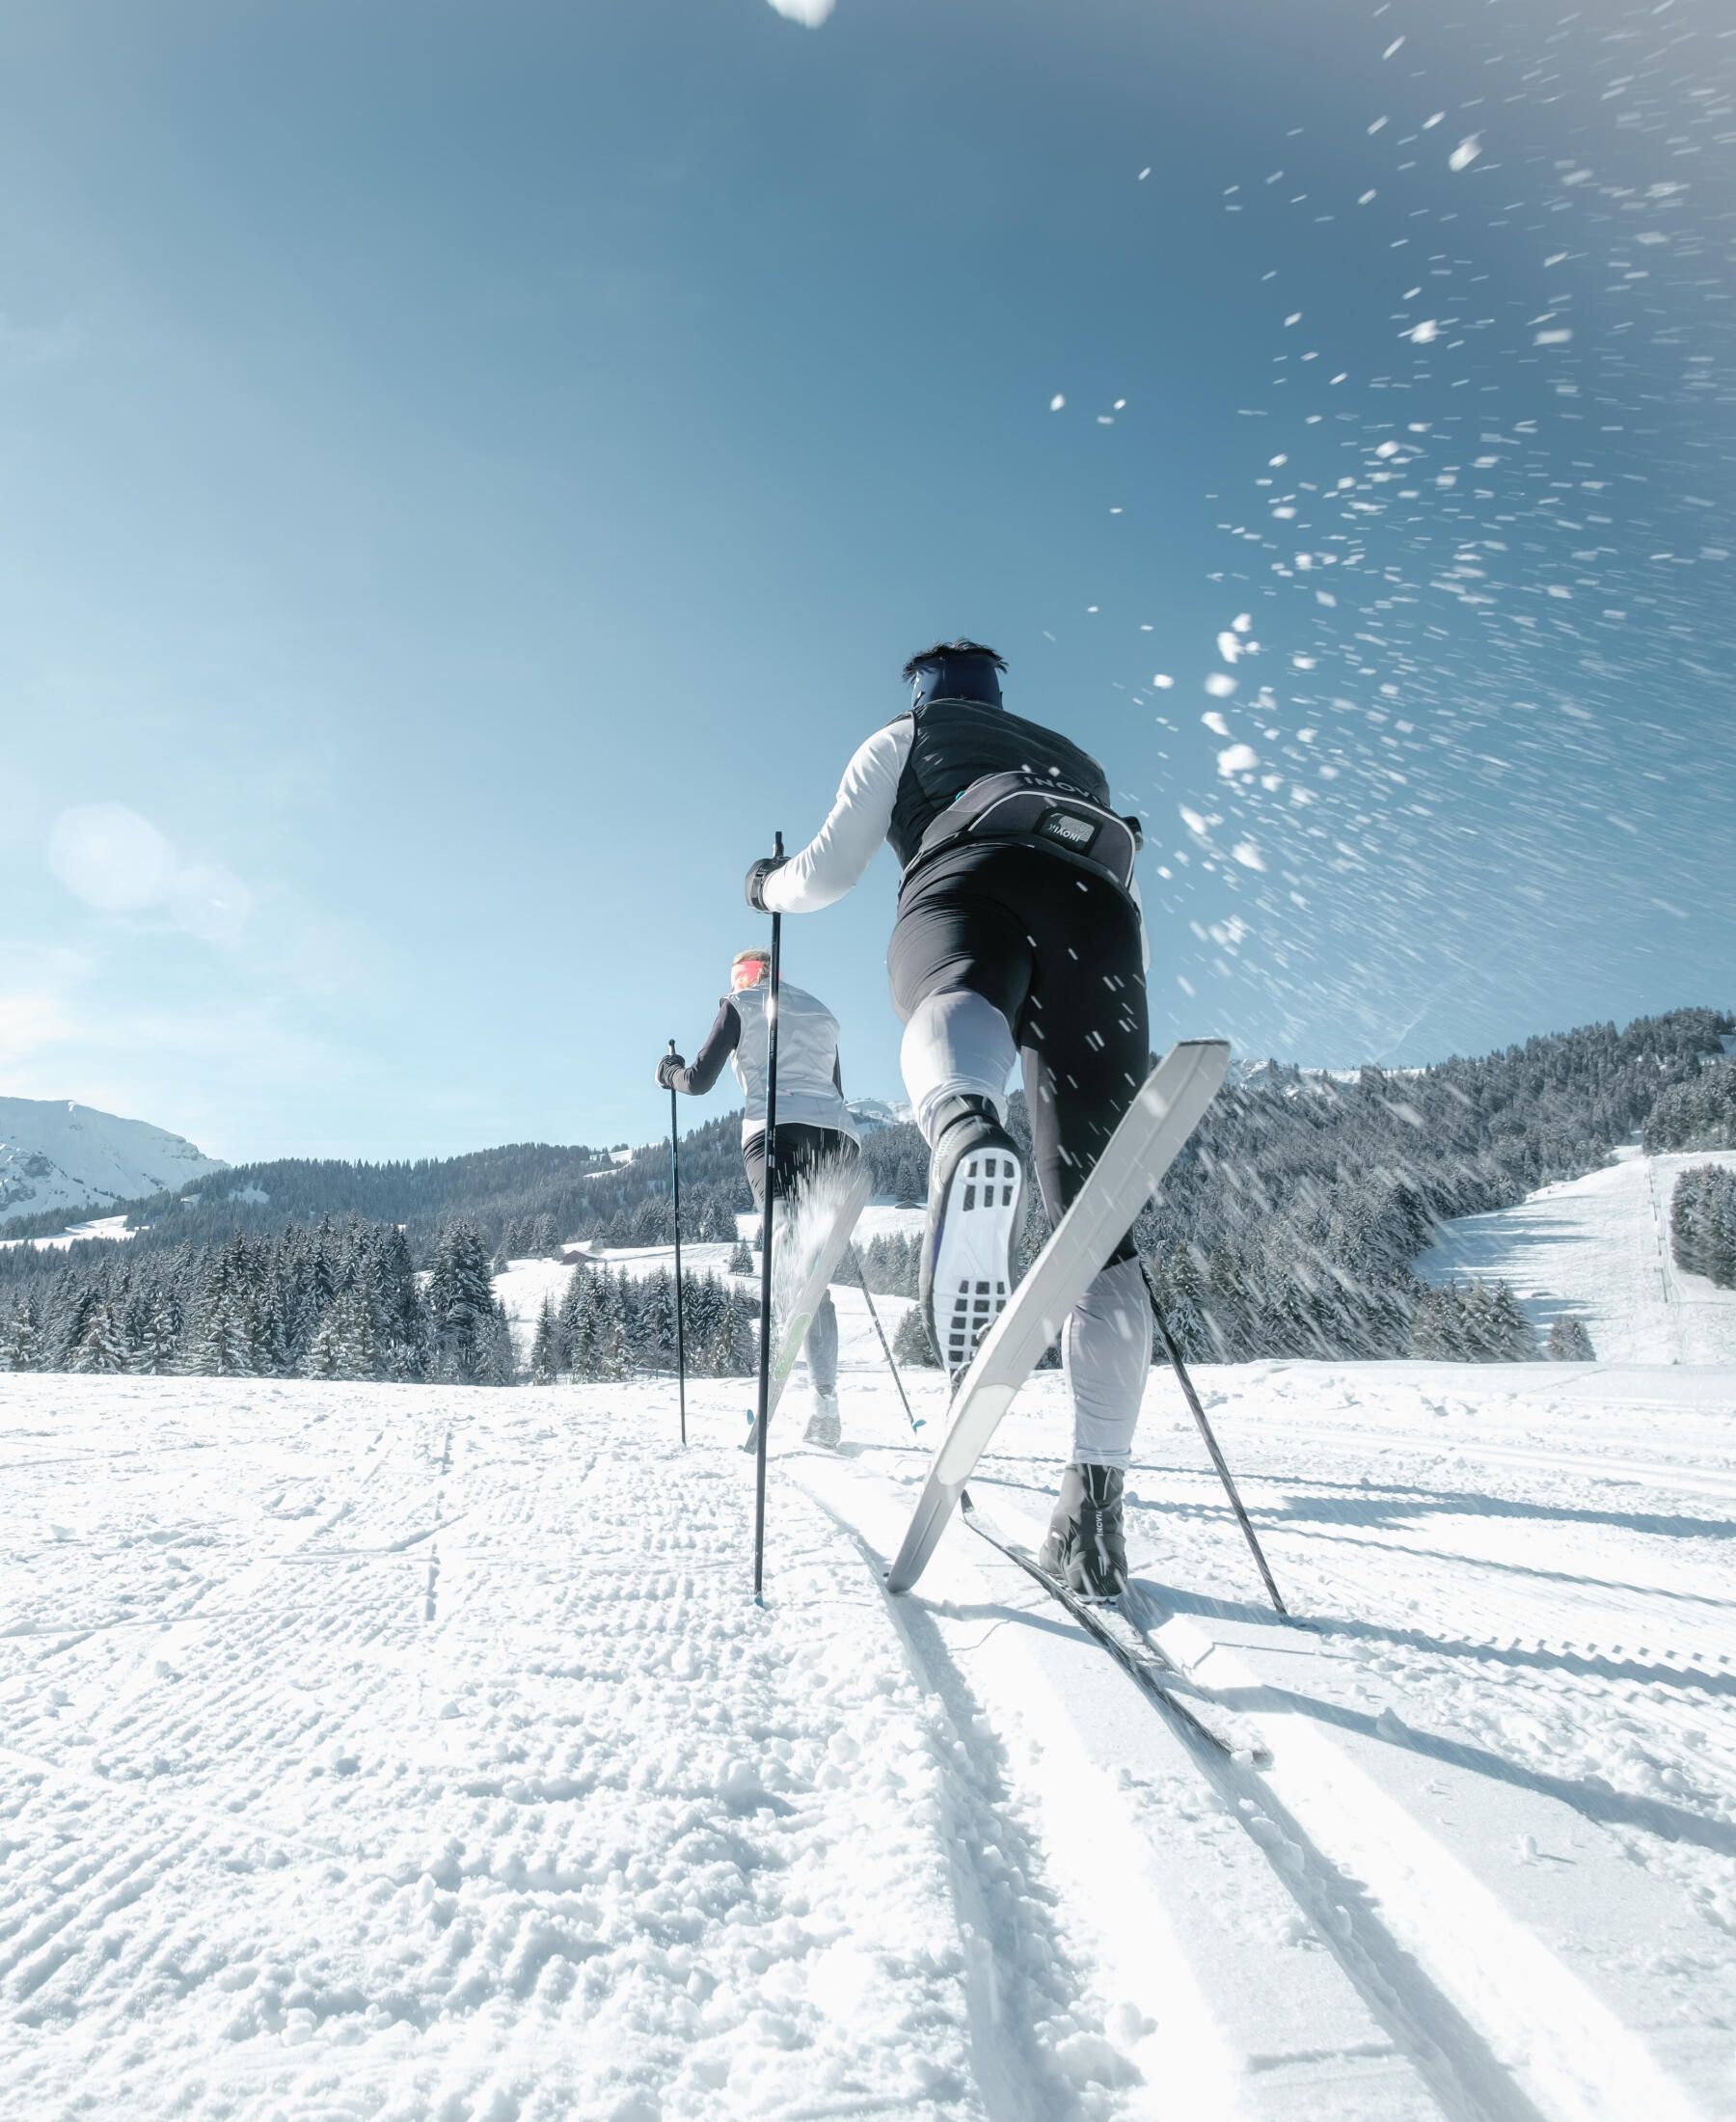 All about the biathlon